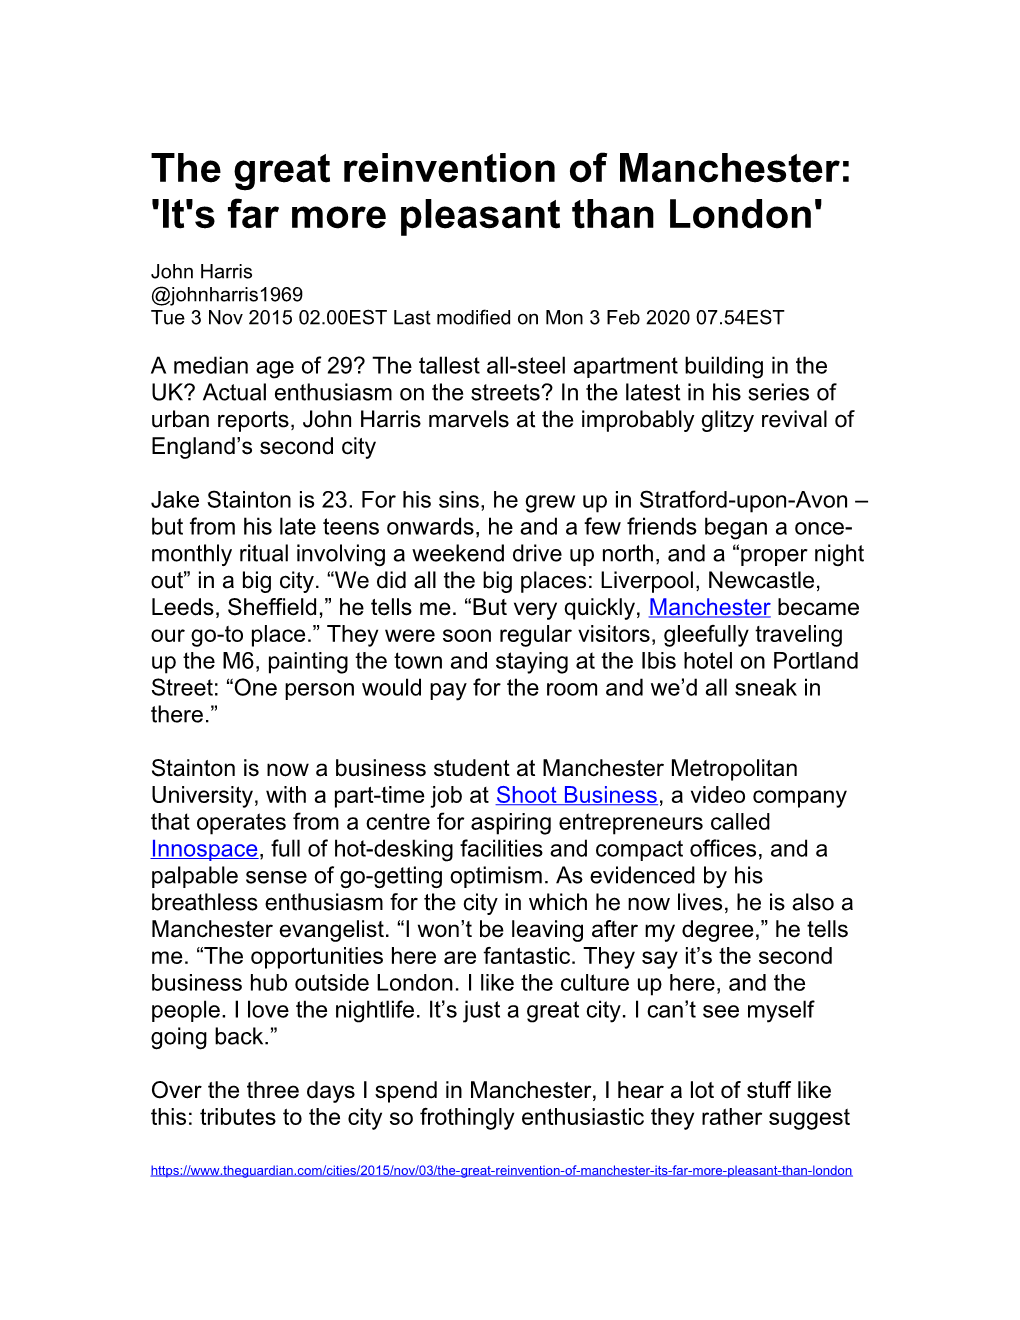 The Great Reinvention of Manchester: 'It's Far More Pleasant Than London'